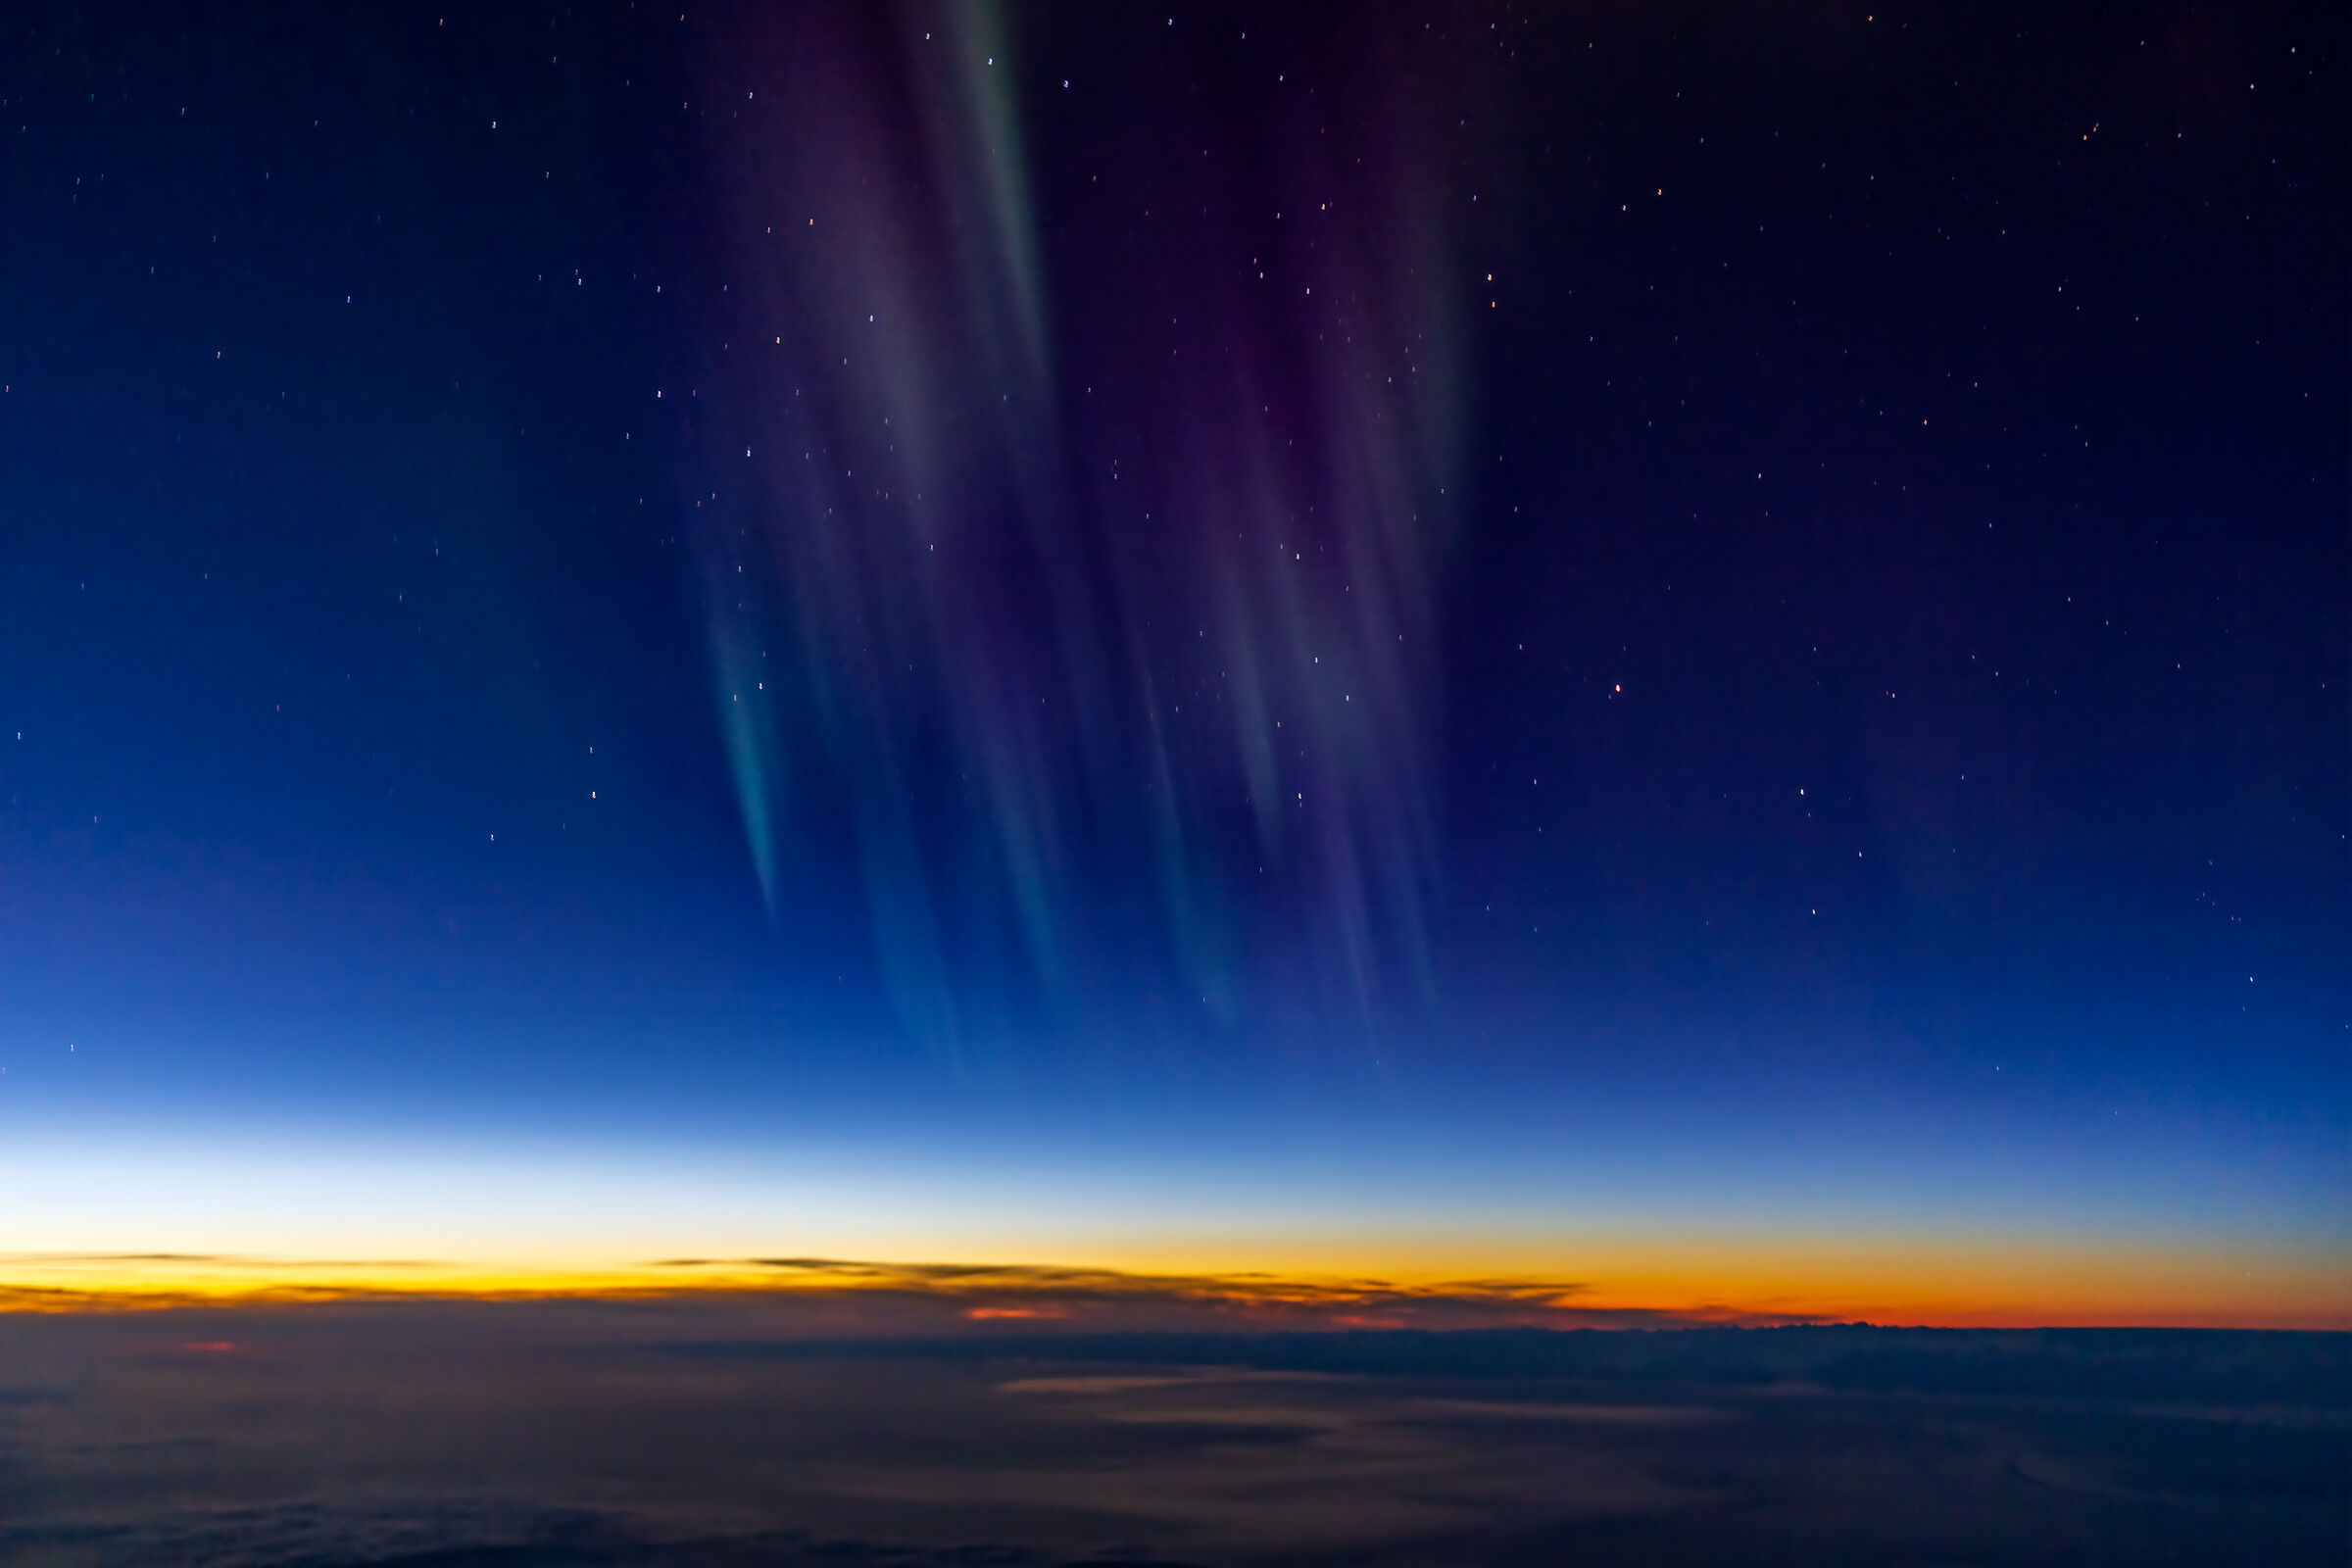 Borealis 66N over Greenland (sunset time)...